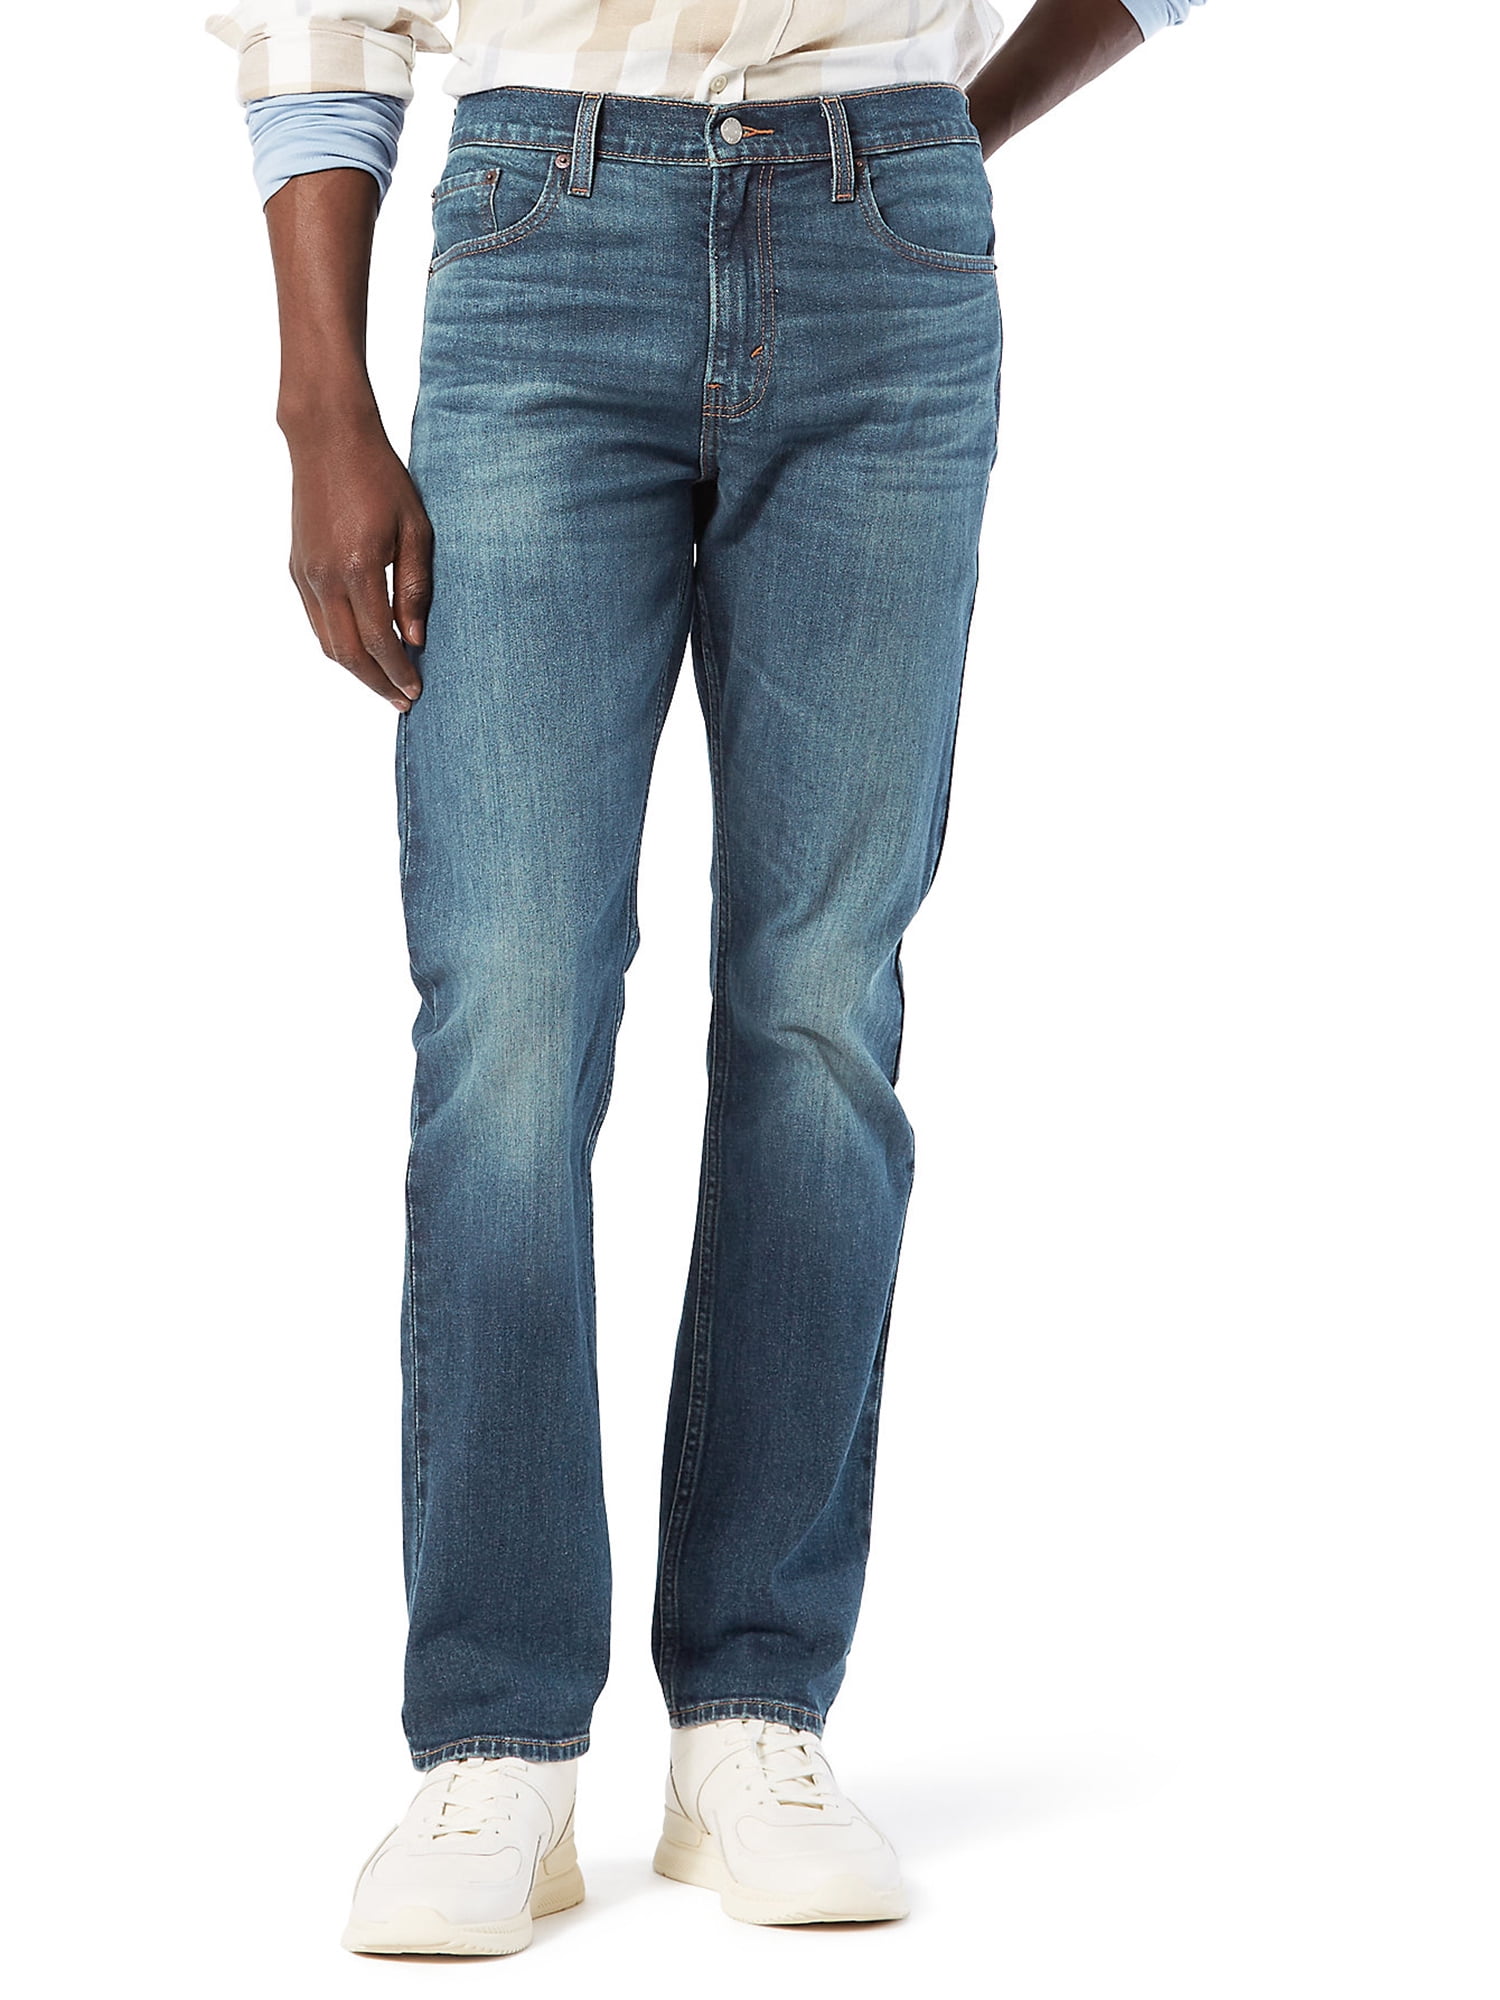 Signature By Levi Strauss & Co. Men's Straight Fit Jeans 